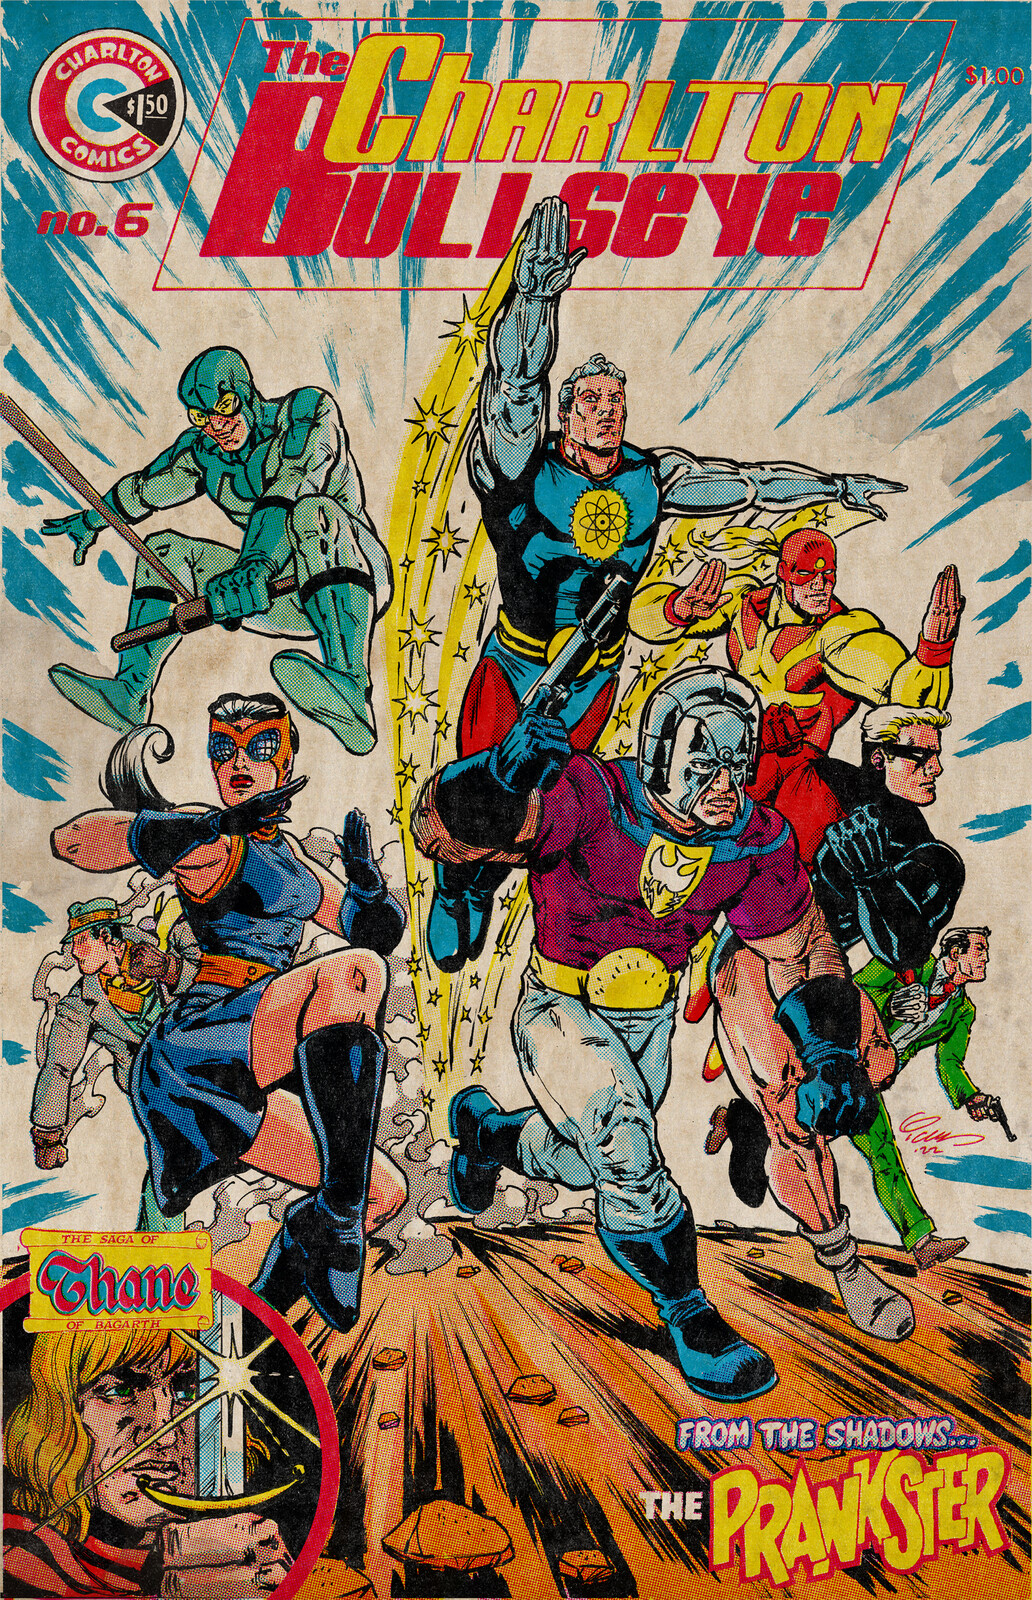 I enjoy Charlton Comics, and Bullseye was a series that was canceled with issue five. Charlton Bullseye issue six cover featuring Peacemaker, Captain Atom, Blue Beetle, Judomaster, Nightshade, The Question, Sarge Steel, and Thane.